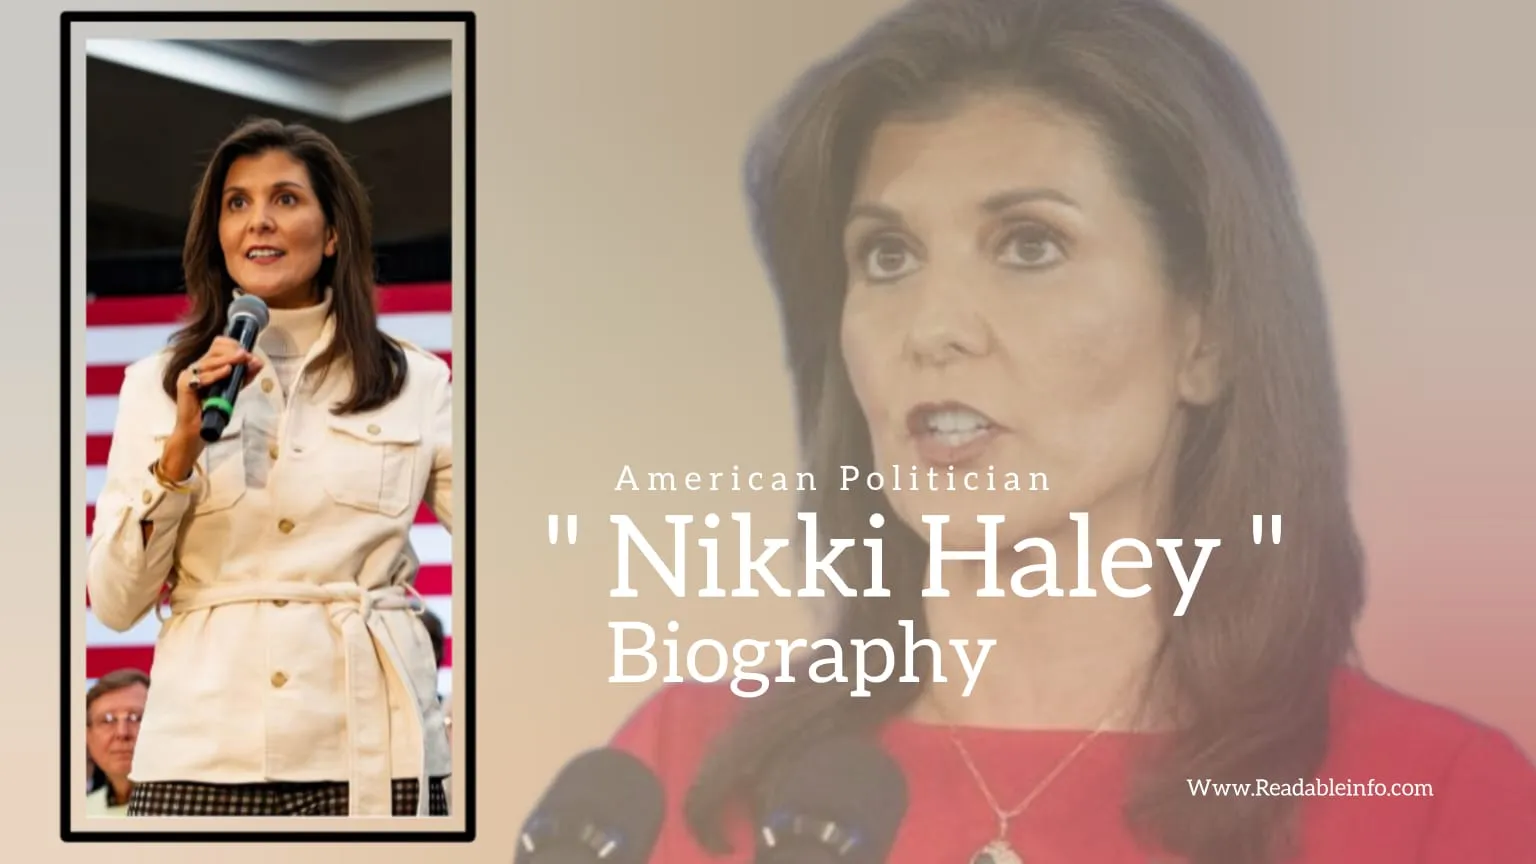 You are currently viewing Nikki Haley Biography (American Politician)